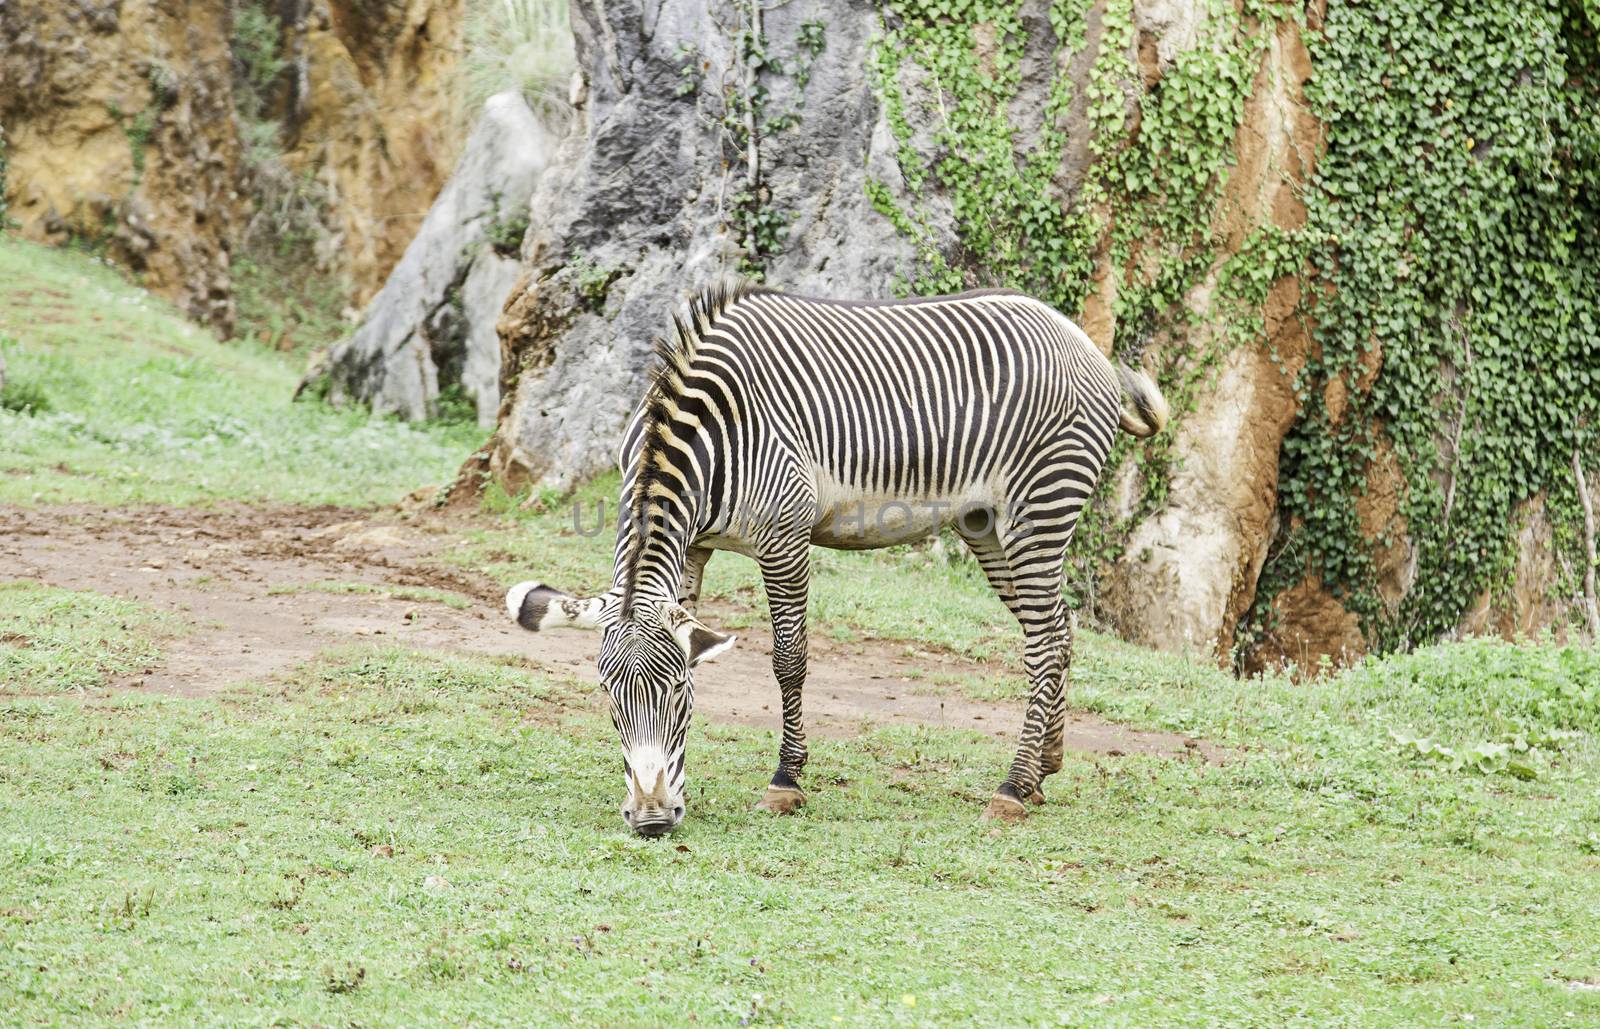 Wild zebras in nature, detail of a mammal.